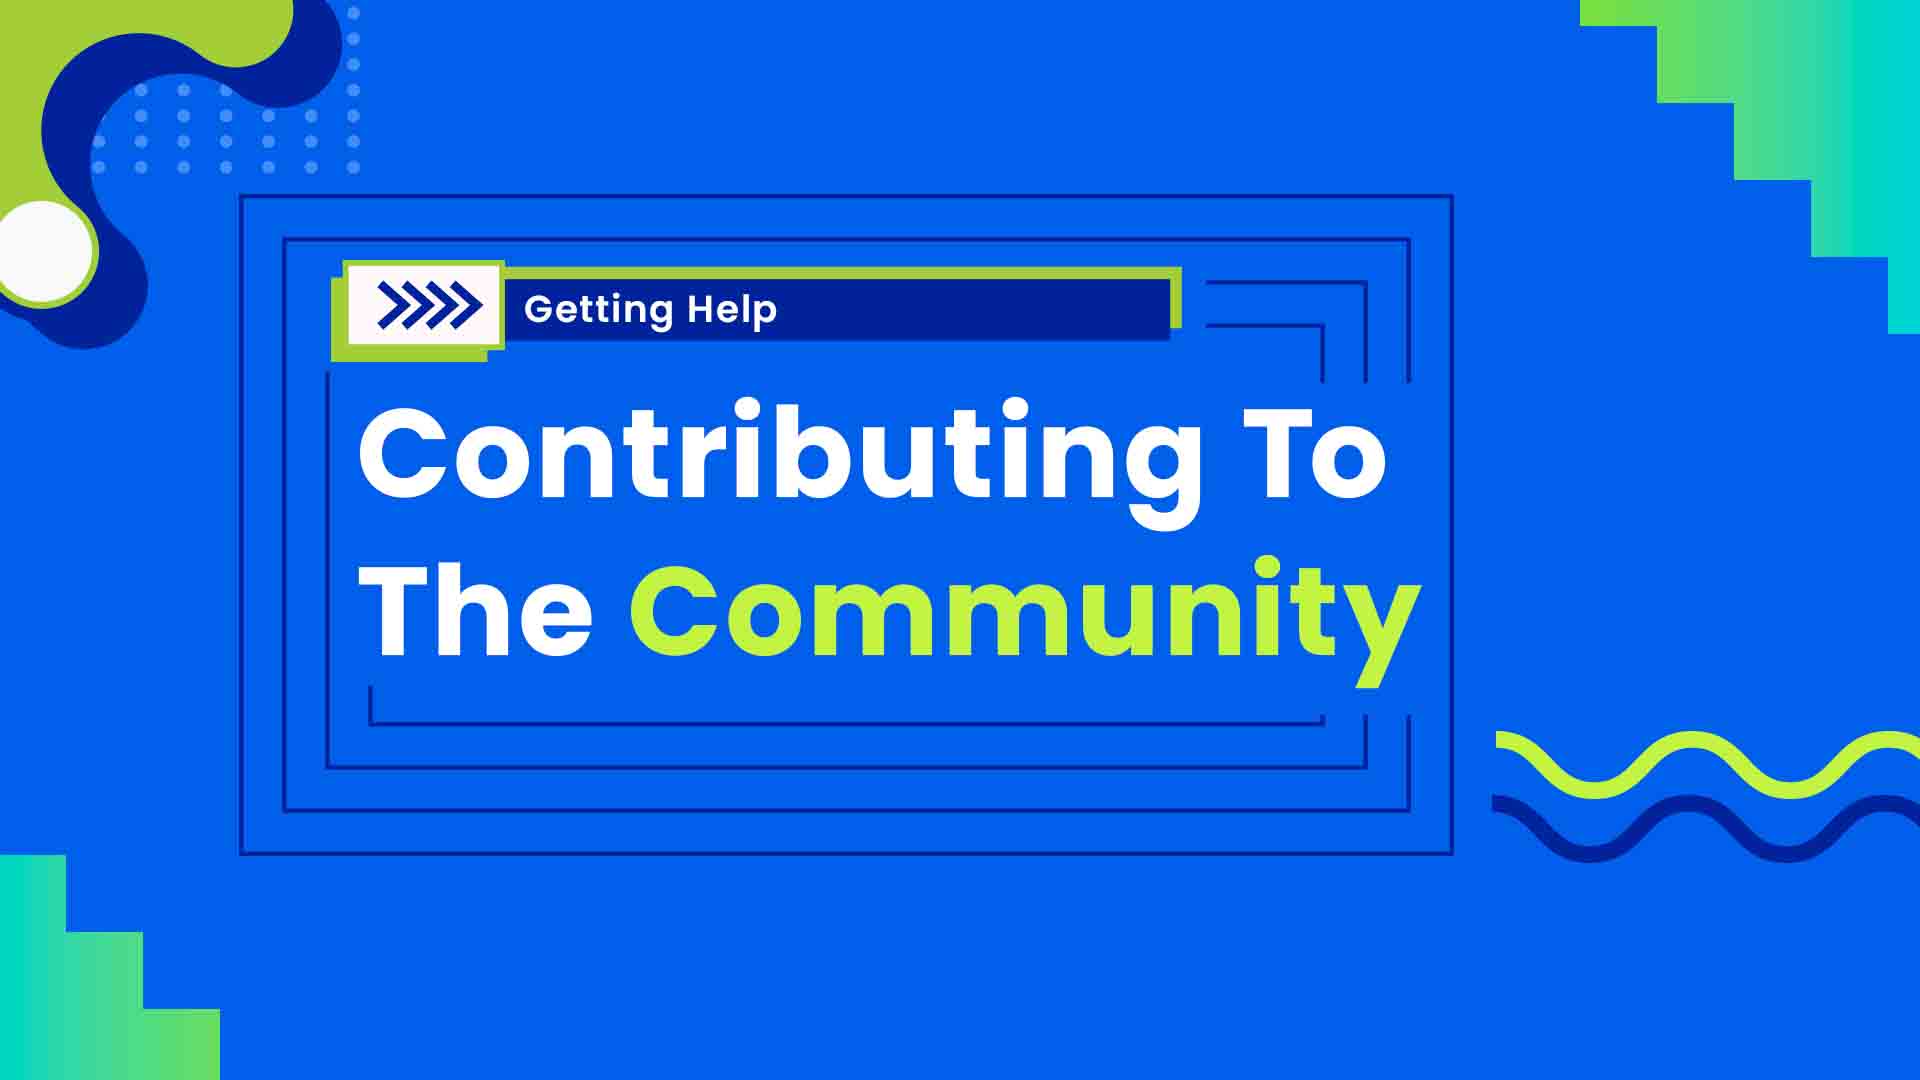 3. Contributing To The Community